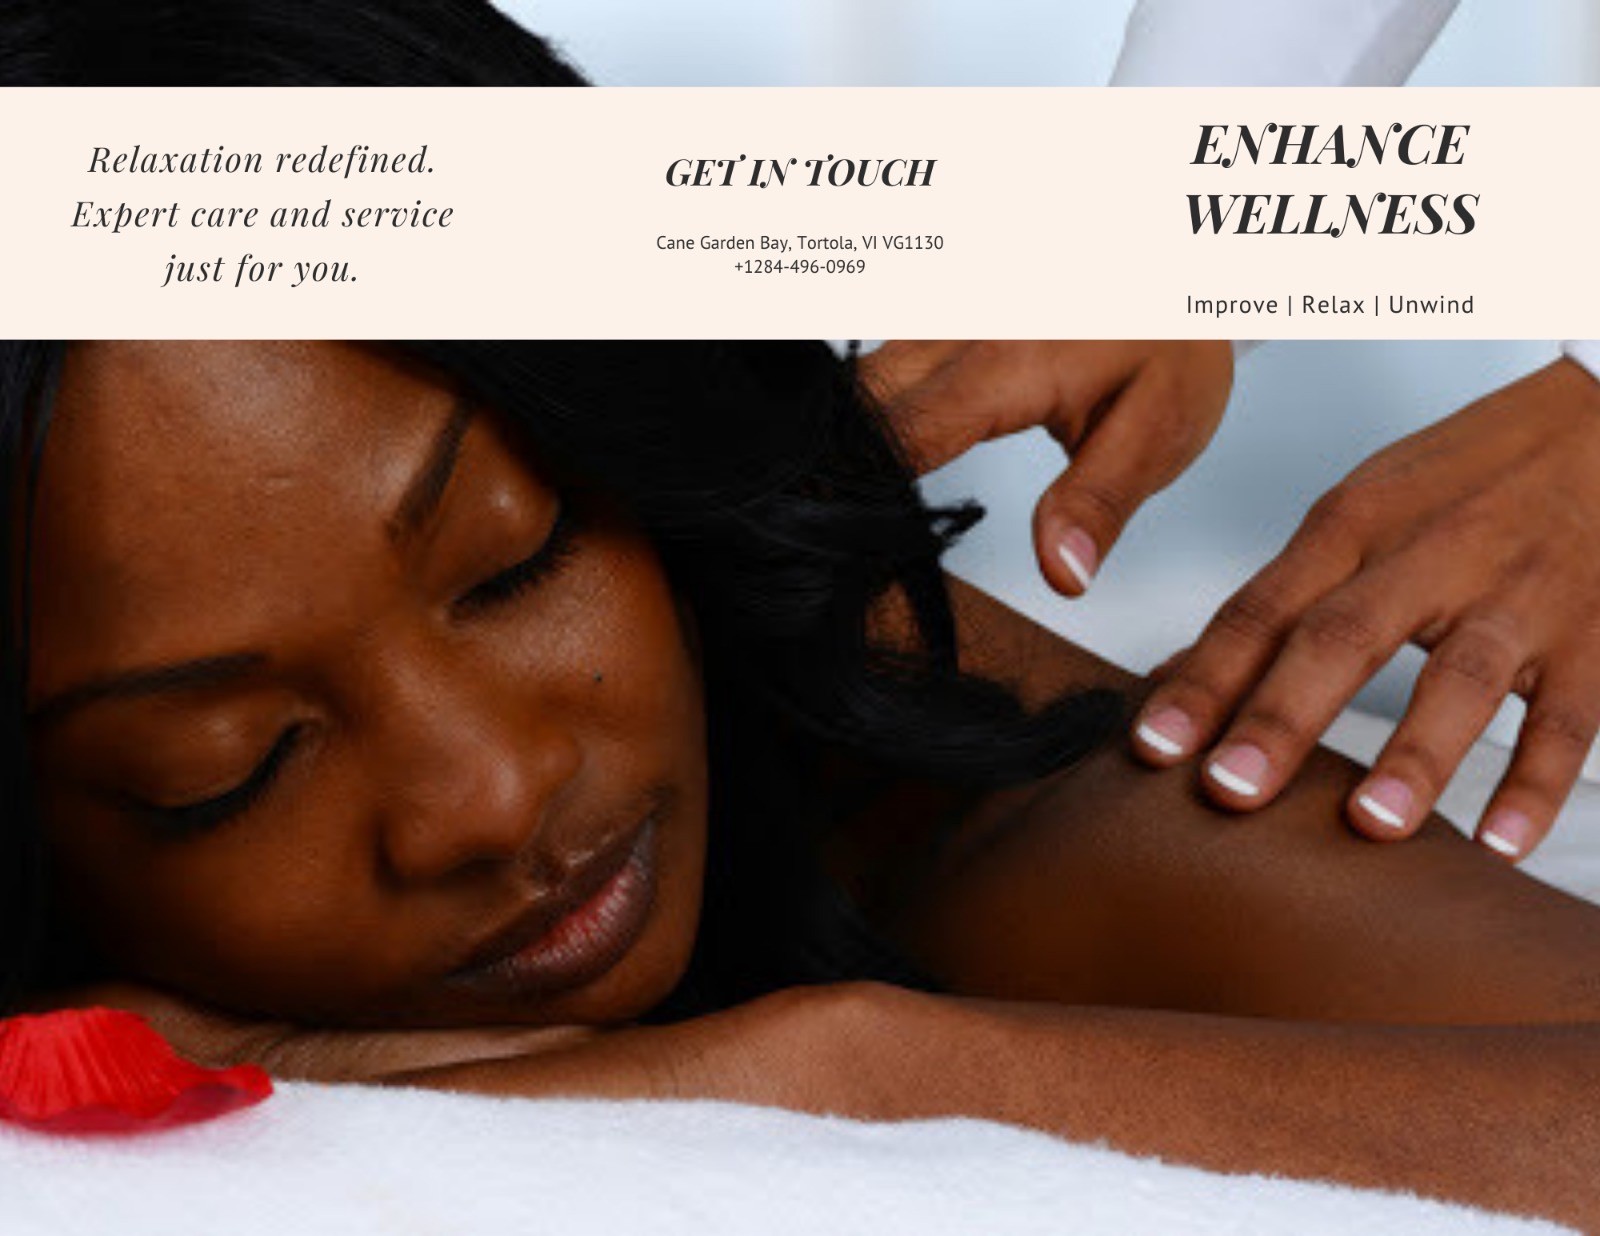 Wellness through Massage Therapy; Now Serving Florida, the Virgin Islands